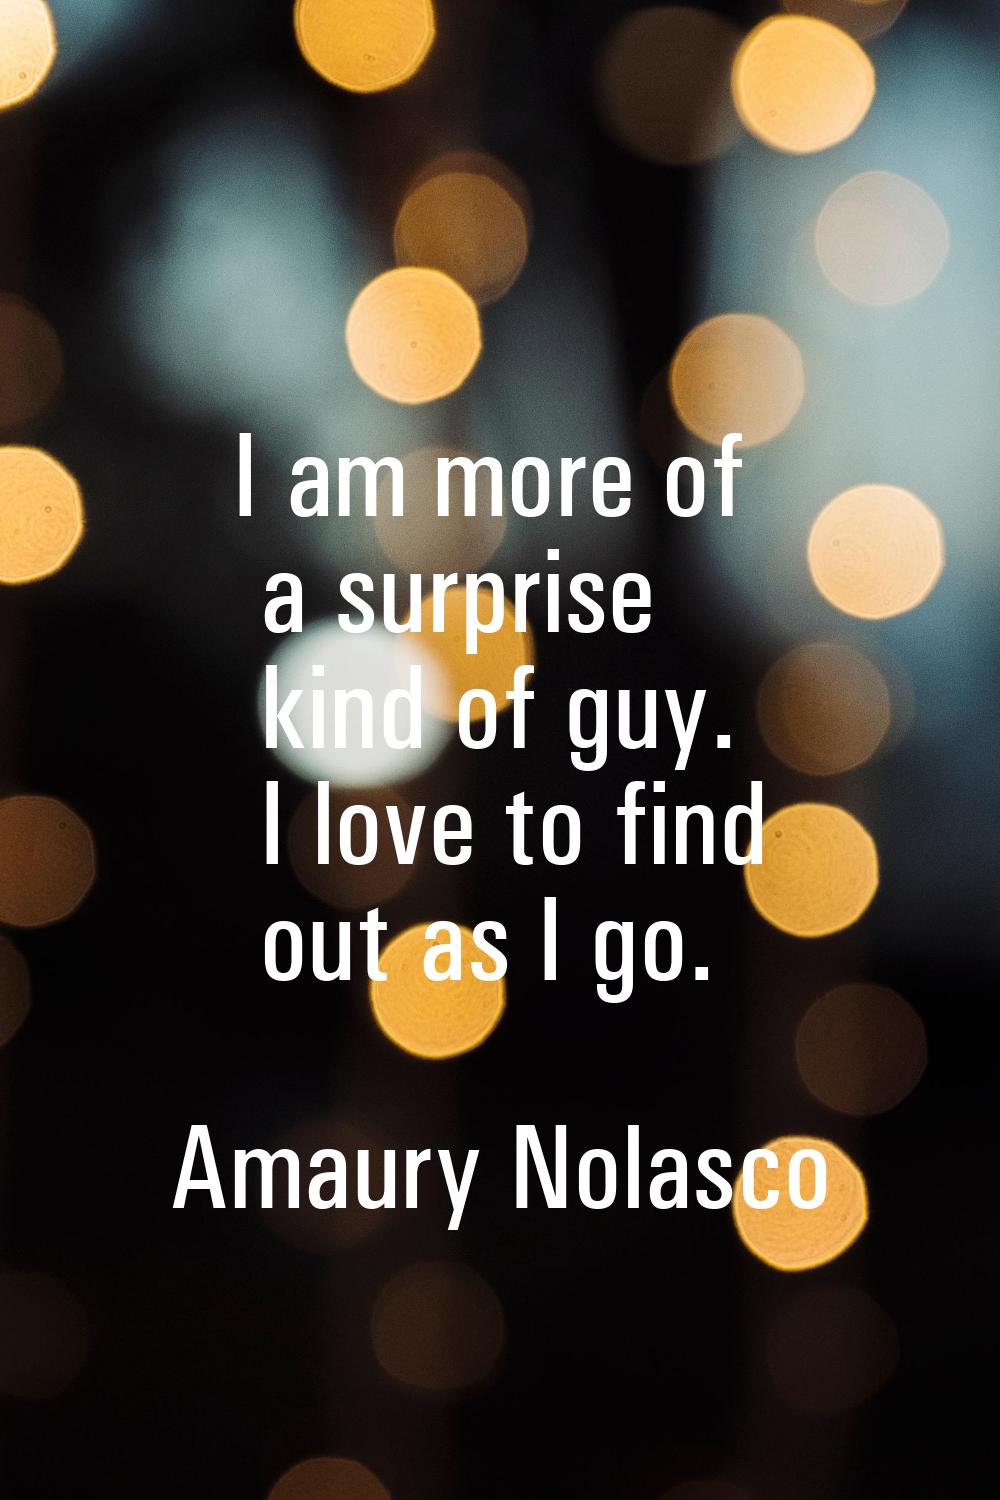 I am more of a surprise kind of guy. I love to find out as I go.